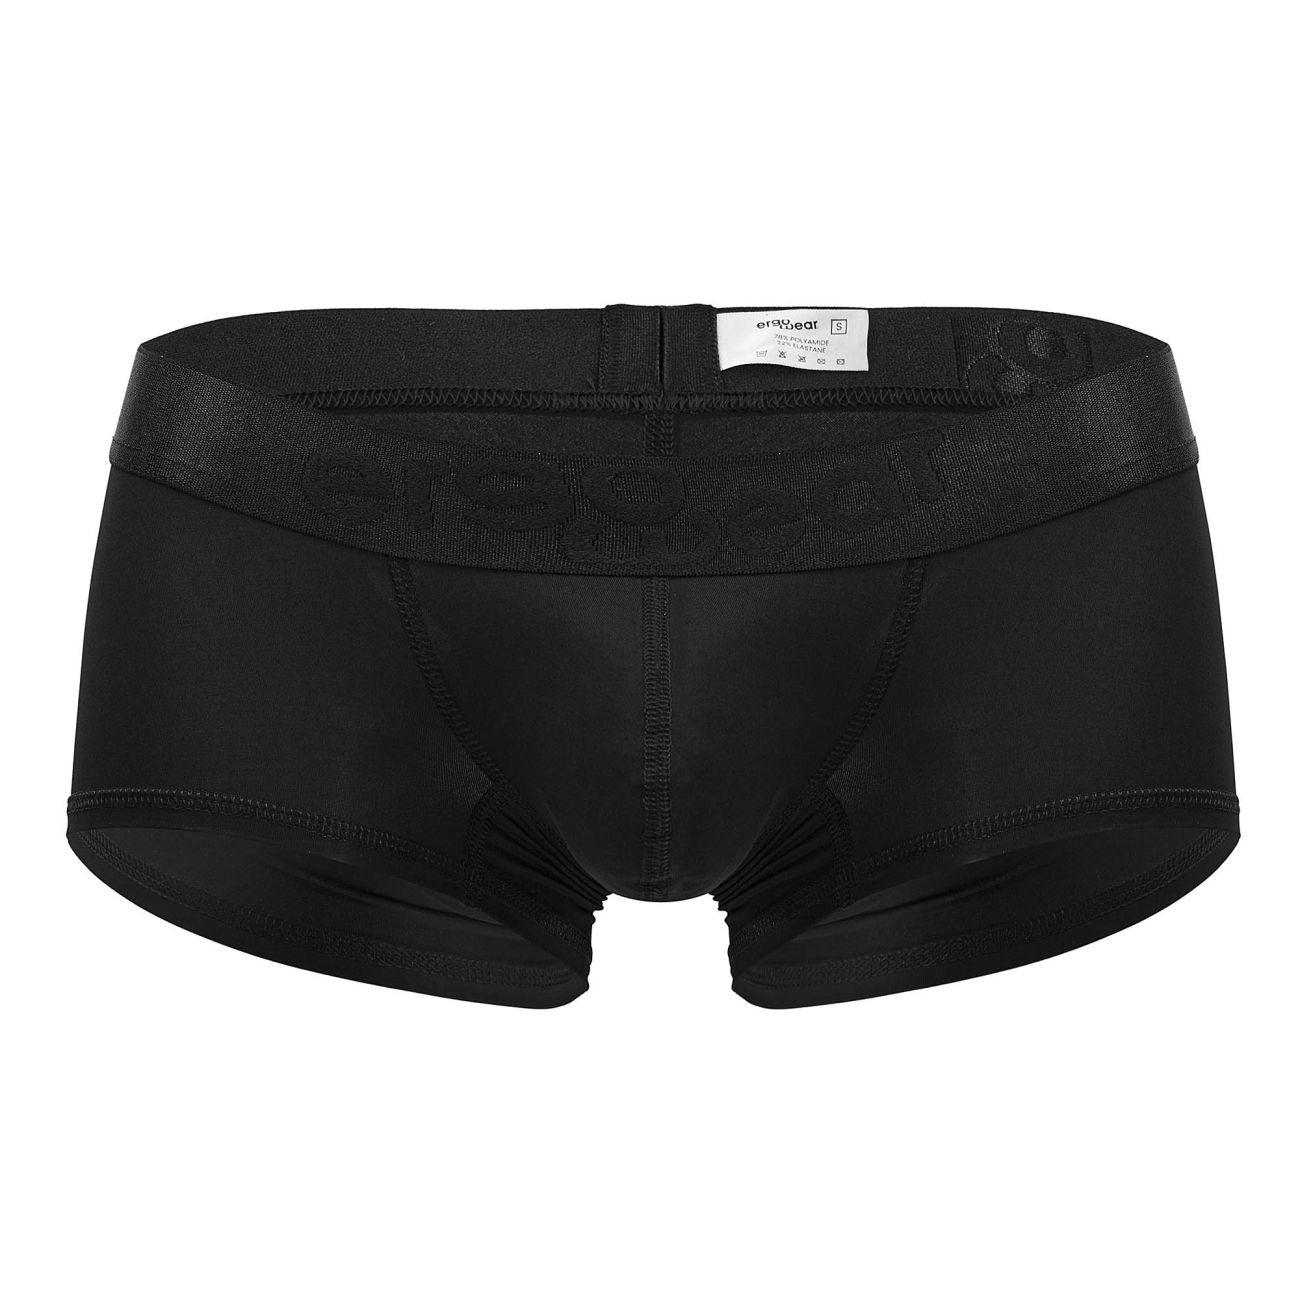 image of product,MAX XX Trunks - SEXYEONE